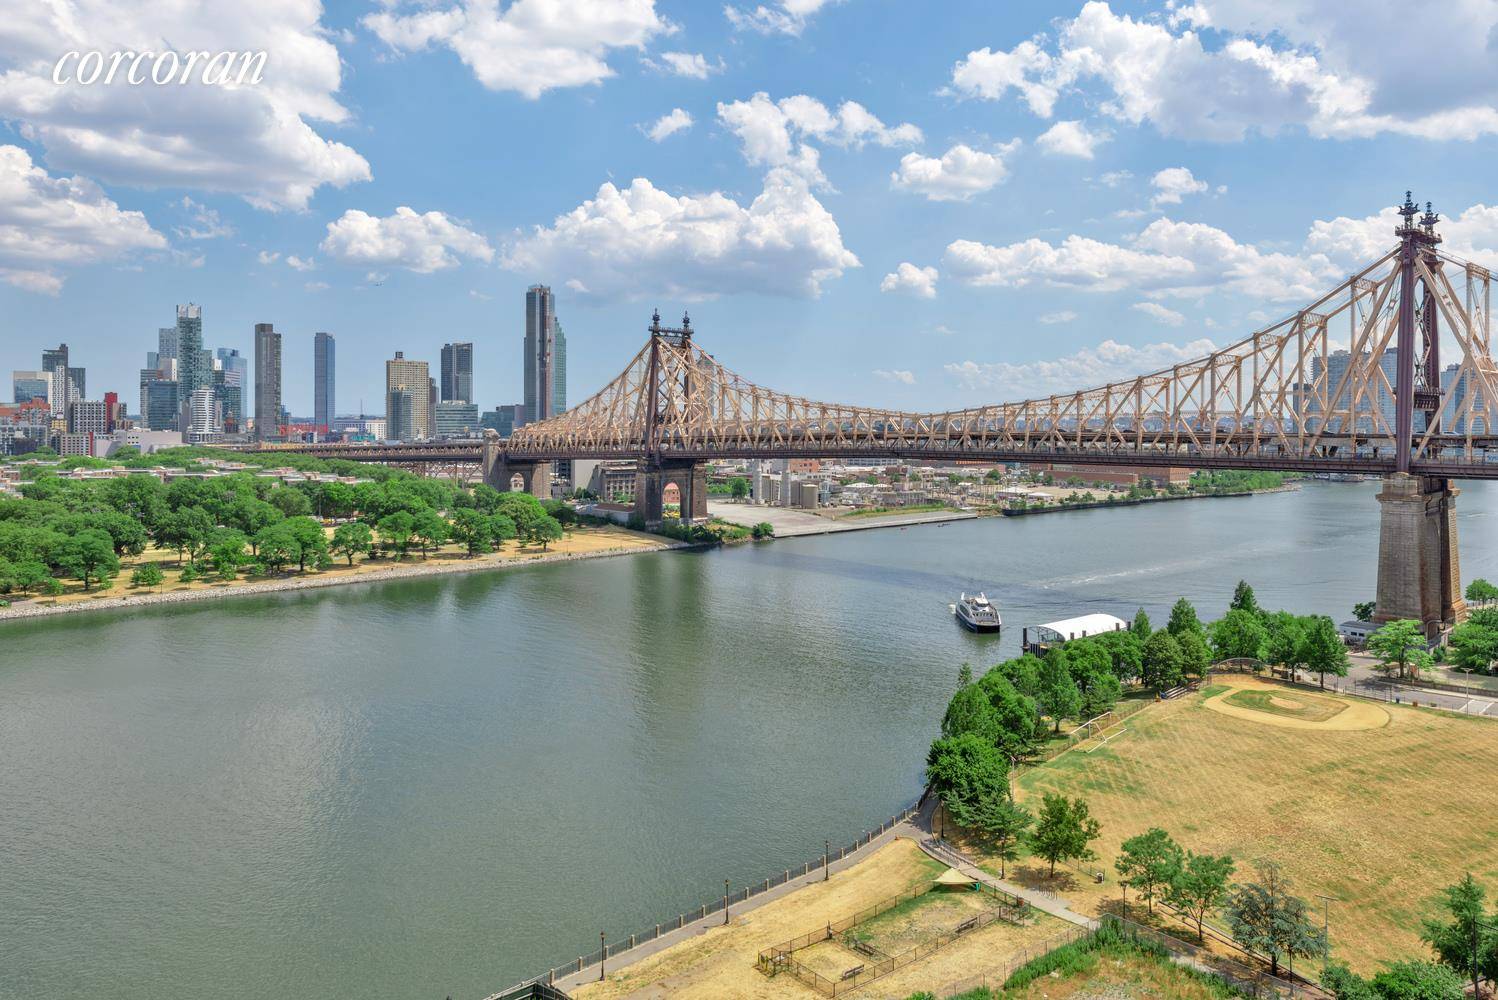 New Massive 1 Bedroom Corner Apartment in One of The Most Desirable Condo Buildings on Roosevelt Island !